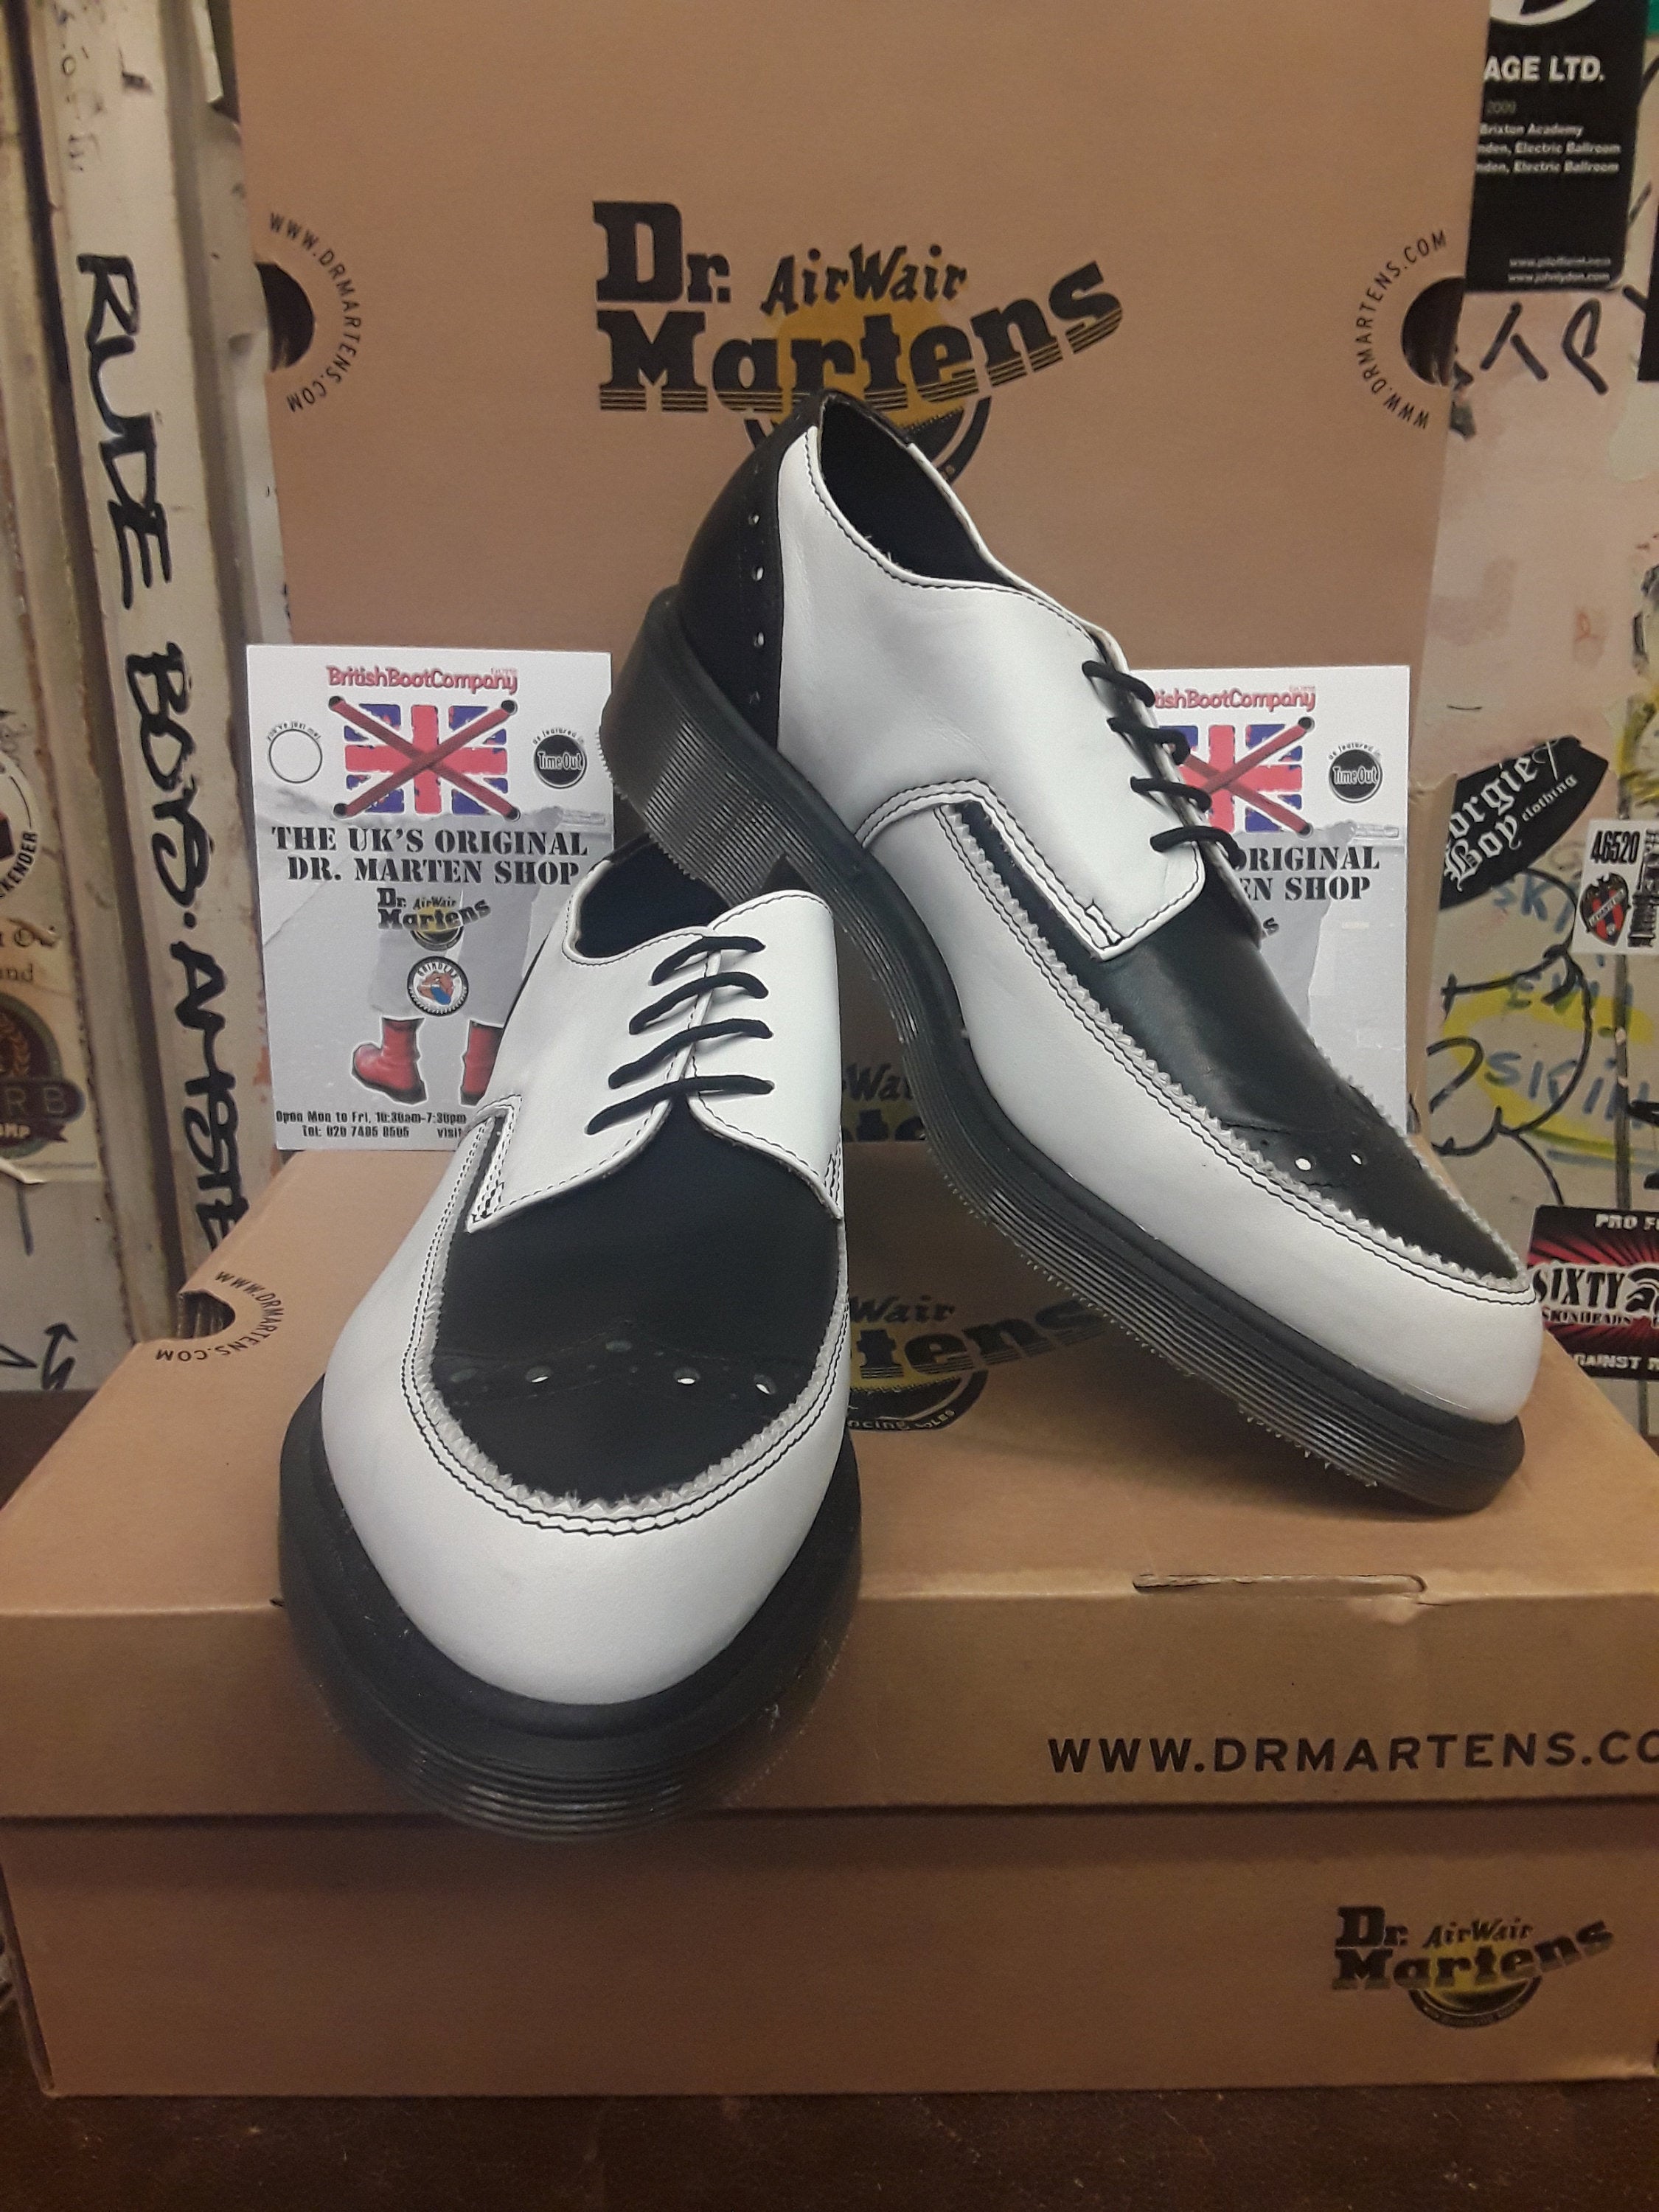 Dr Martens Made in England Winkle Pickers Two Tone Black and White Size 8